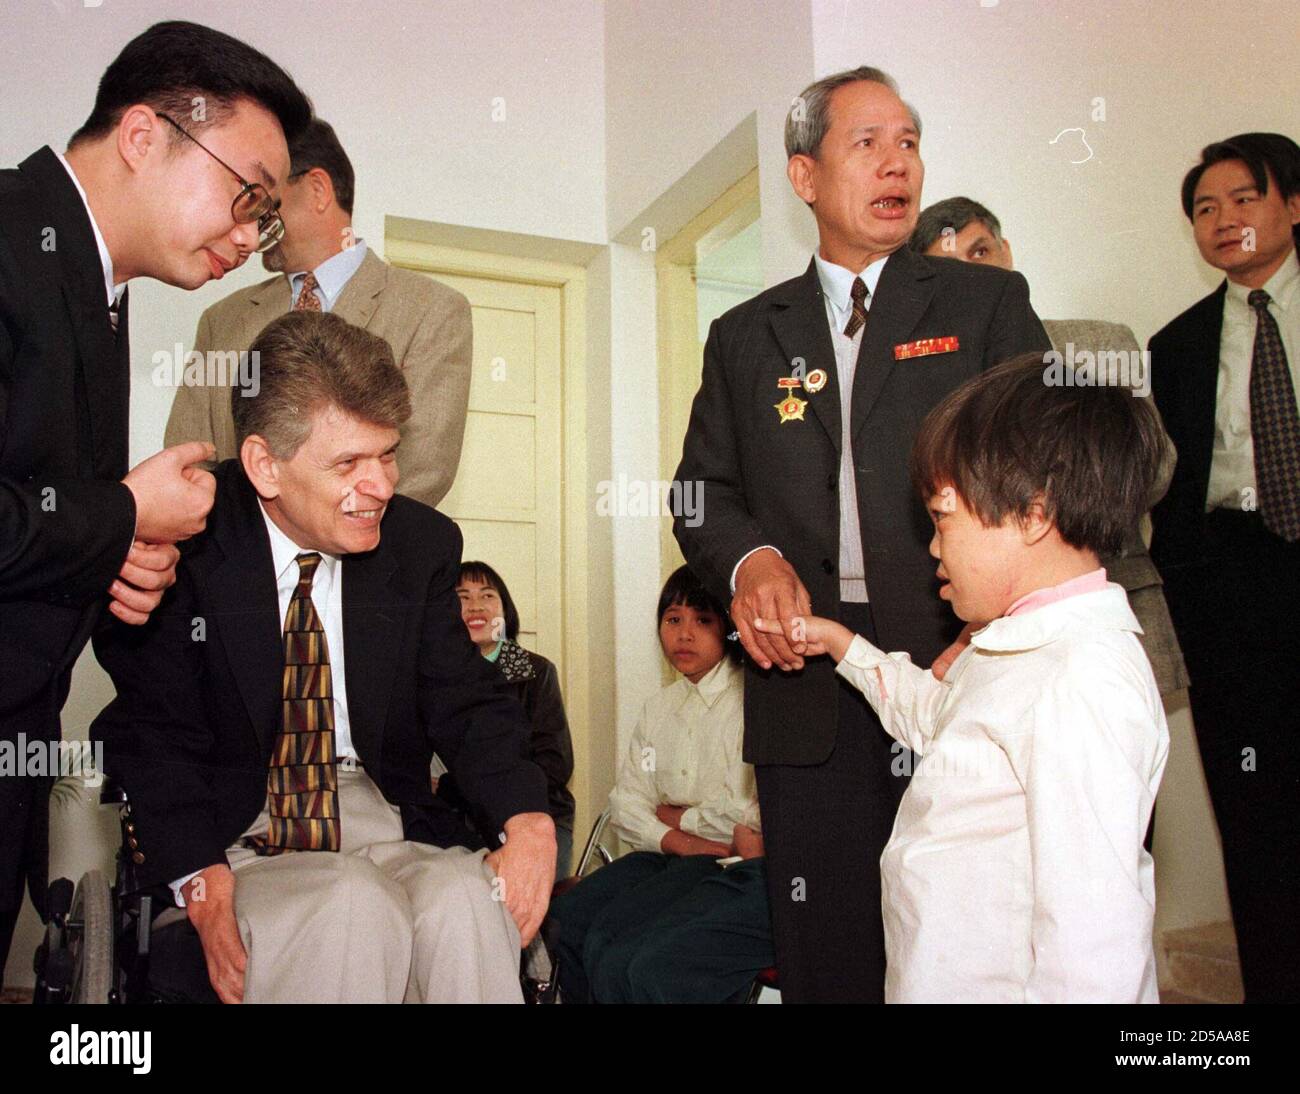 A U S Vietnam War Veteran Meets A Vietnamese Child Suffering Birth Defects Due To Her Parent S Exposure To Agent Orange Tom Cory National Vice President Of The Vietnam Veterans Of America Inc In